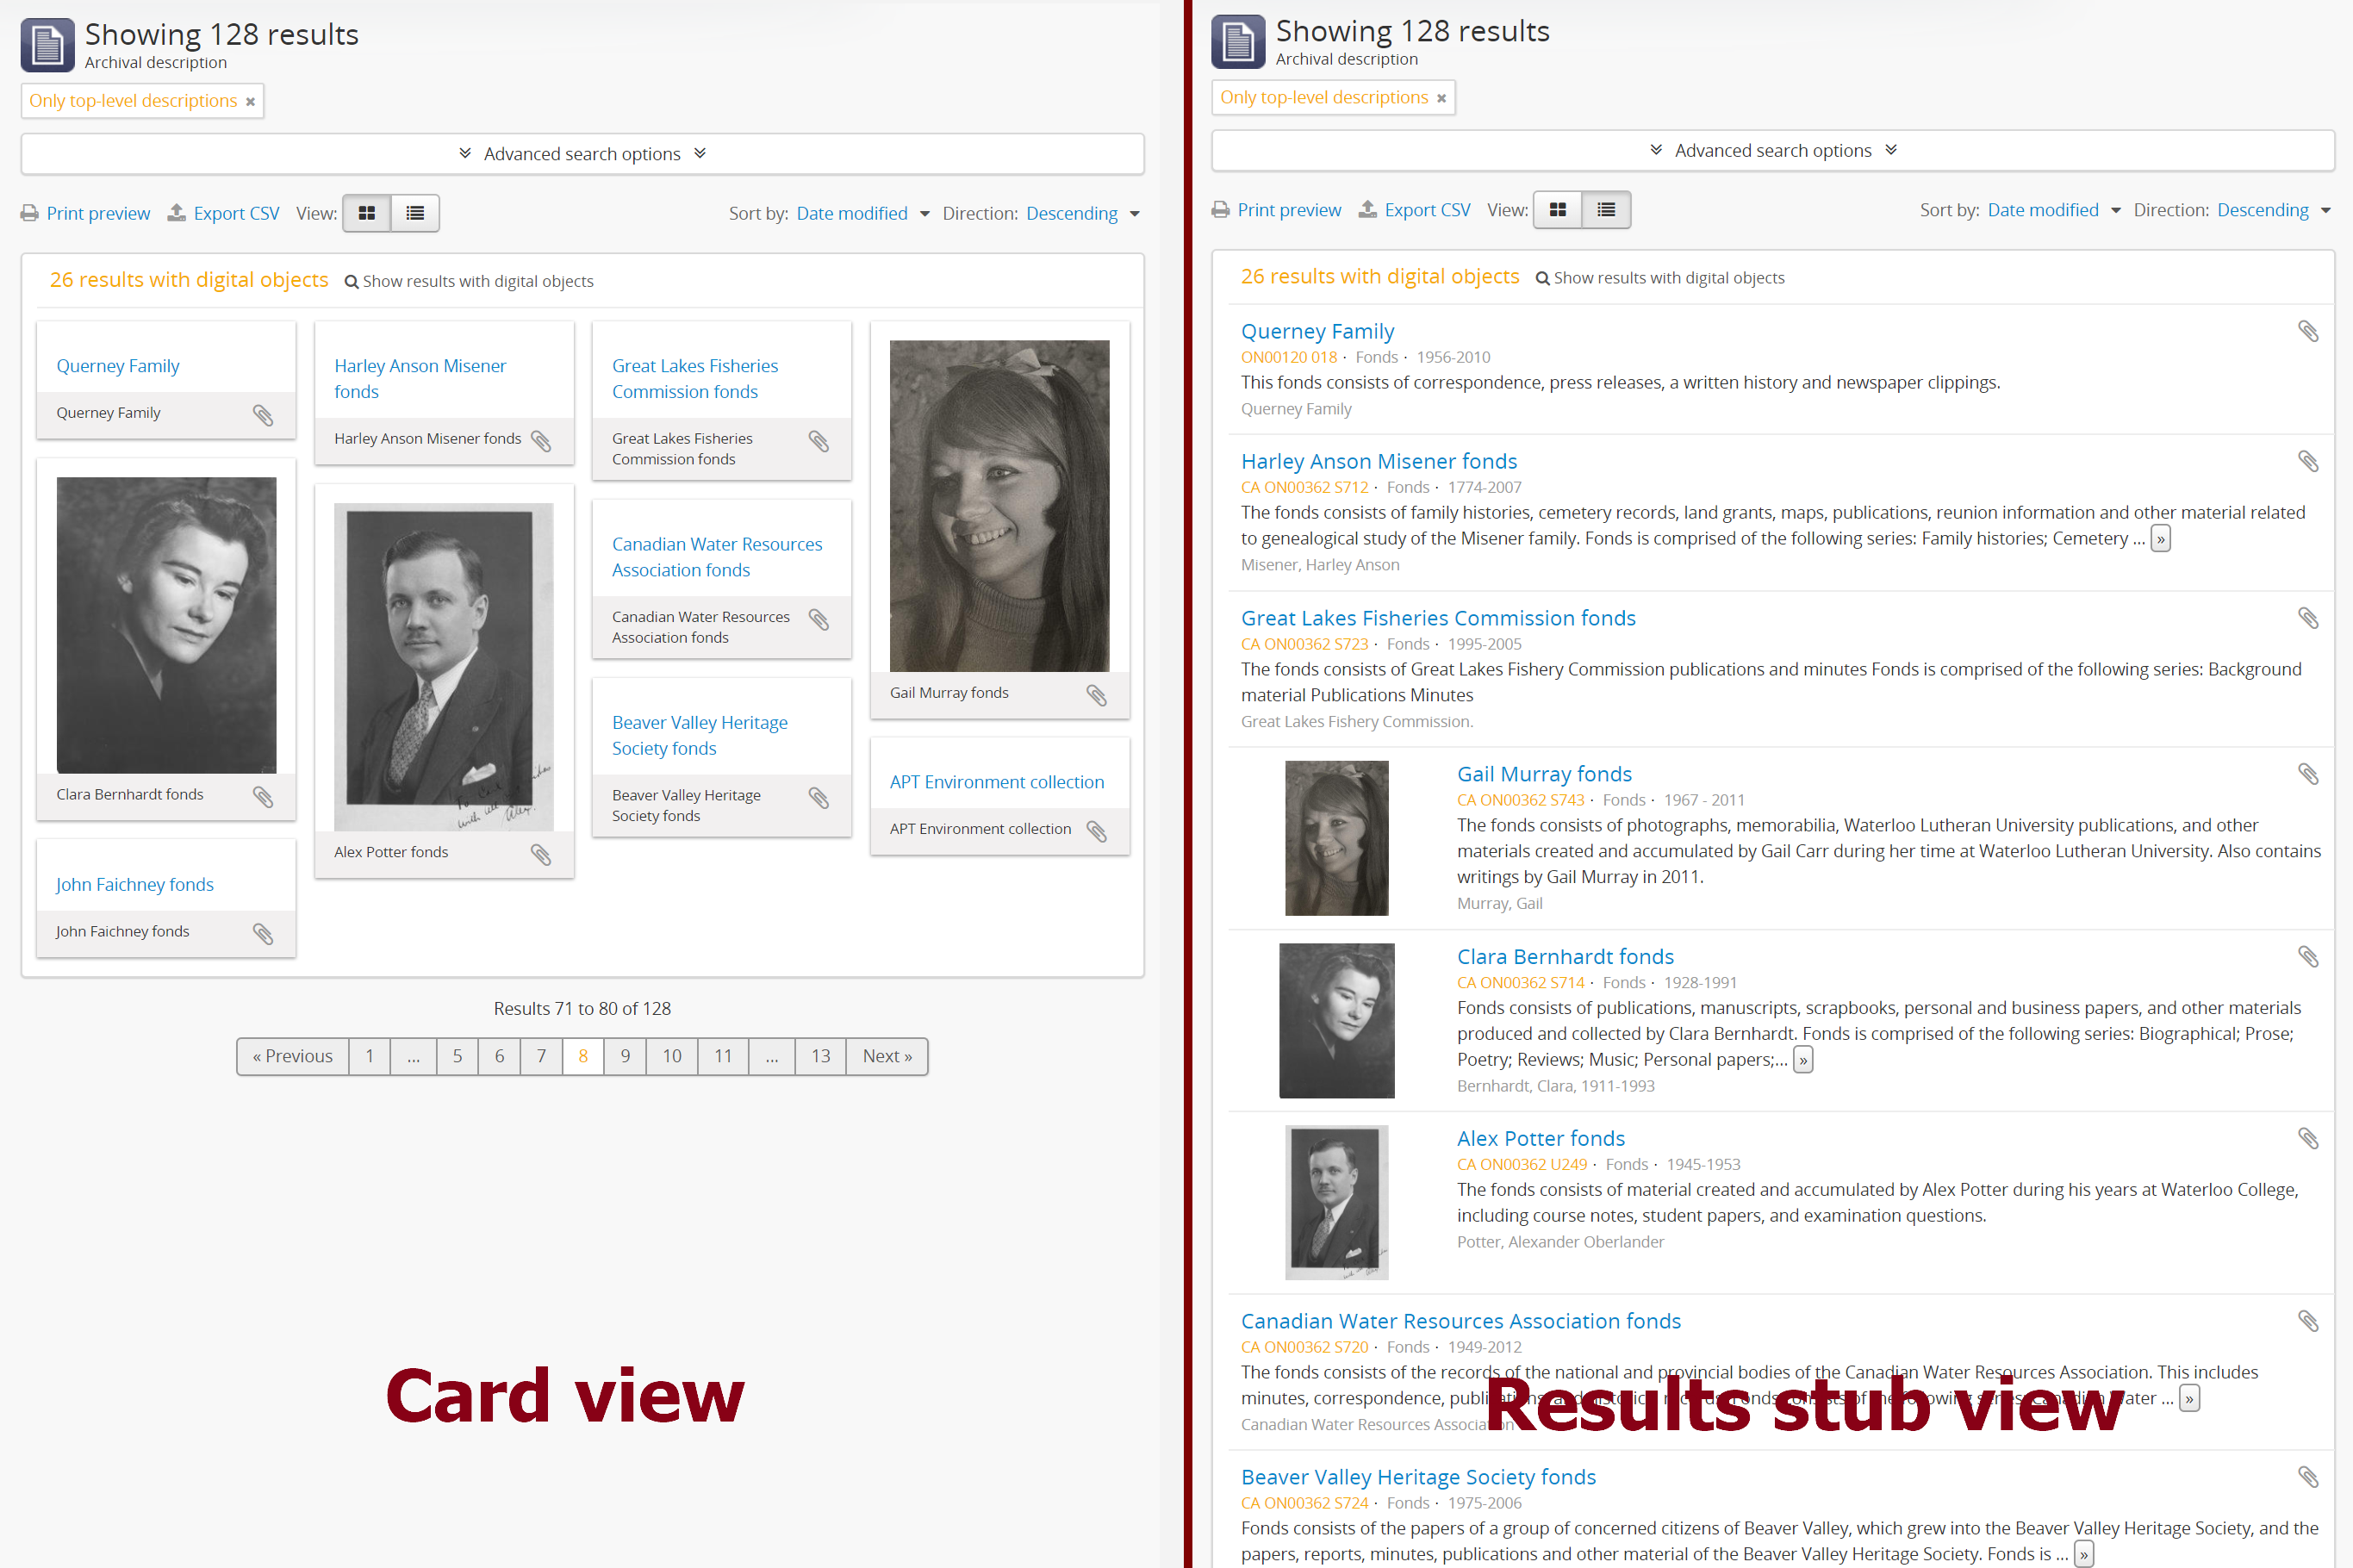 A comparison of the card and results stub views of the archival description browse page